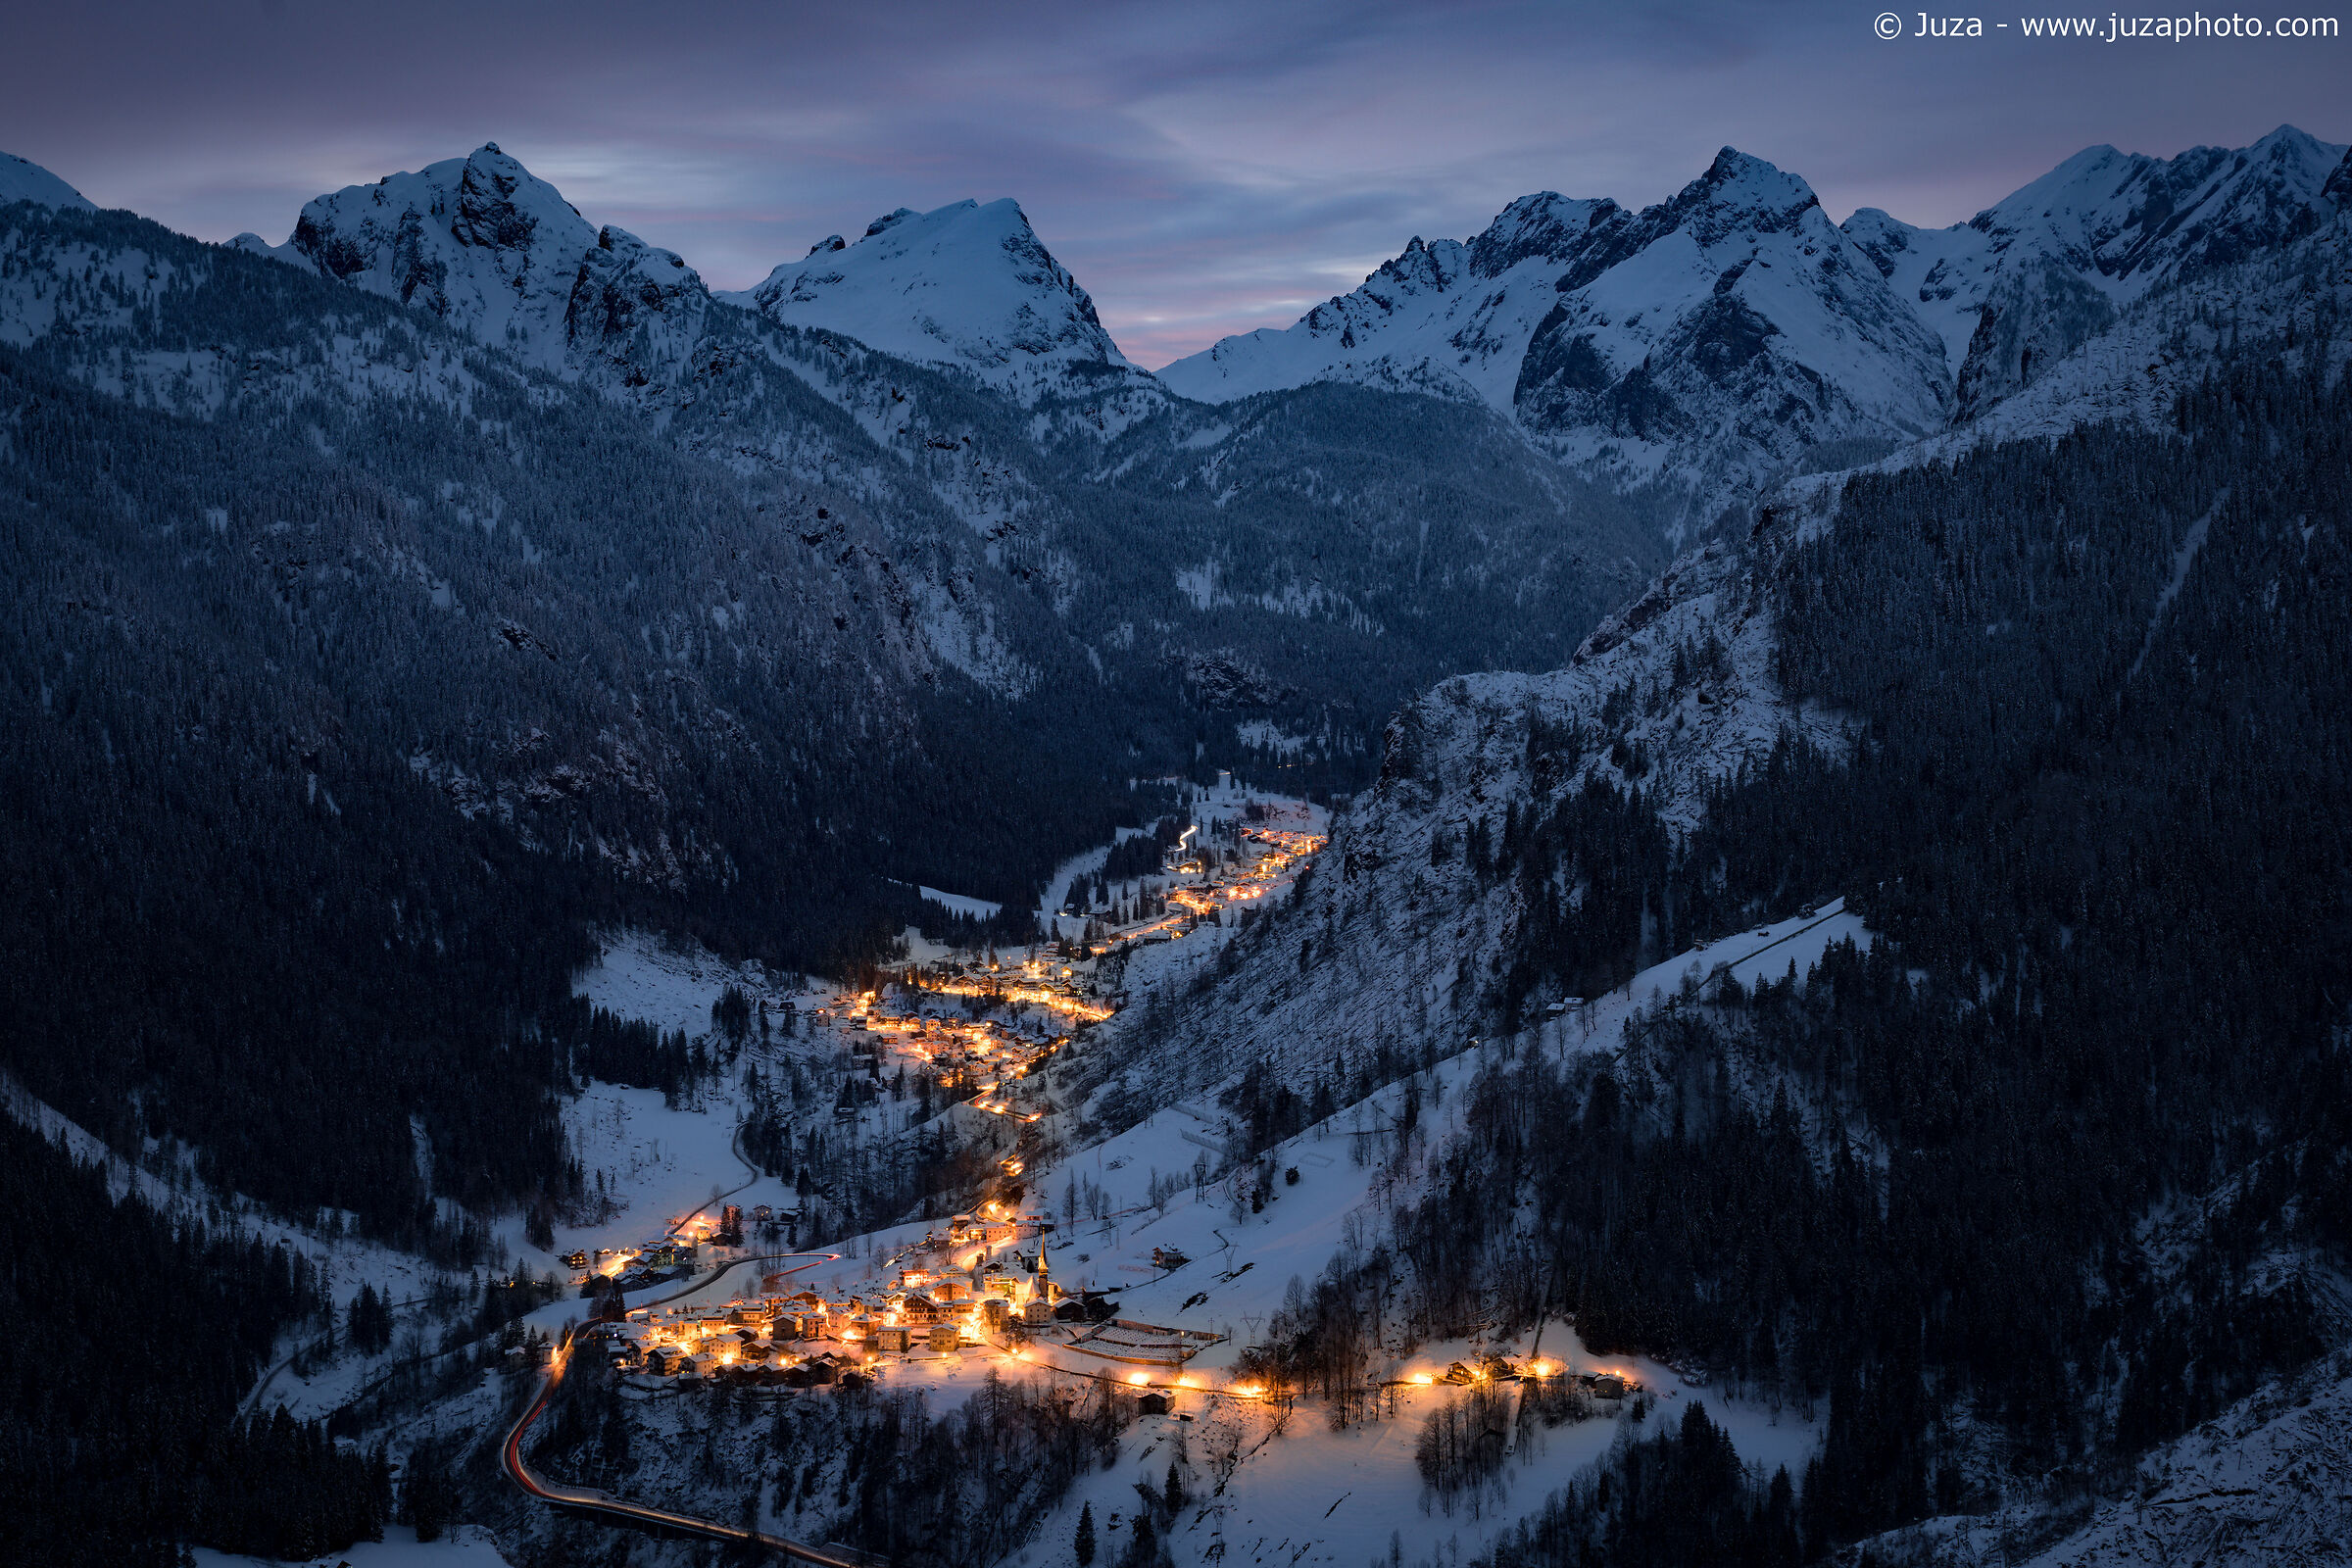 Blue hour from Colle Santa Lucia...